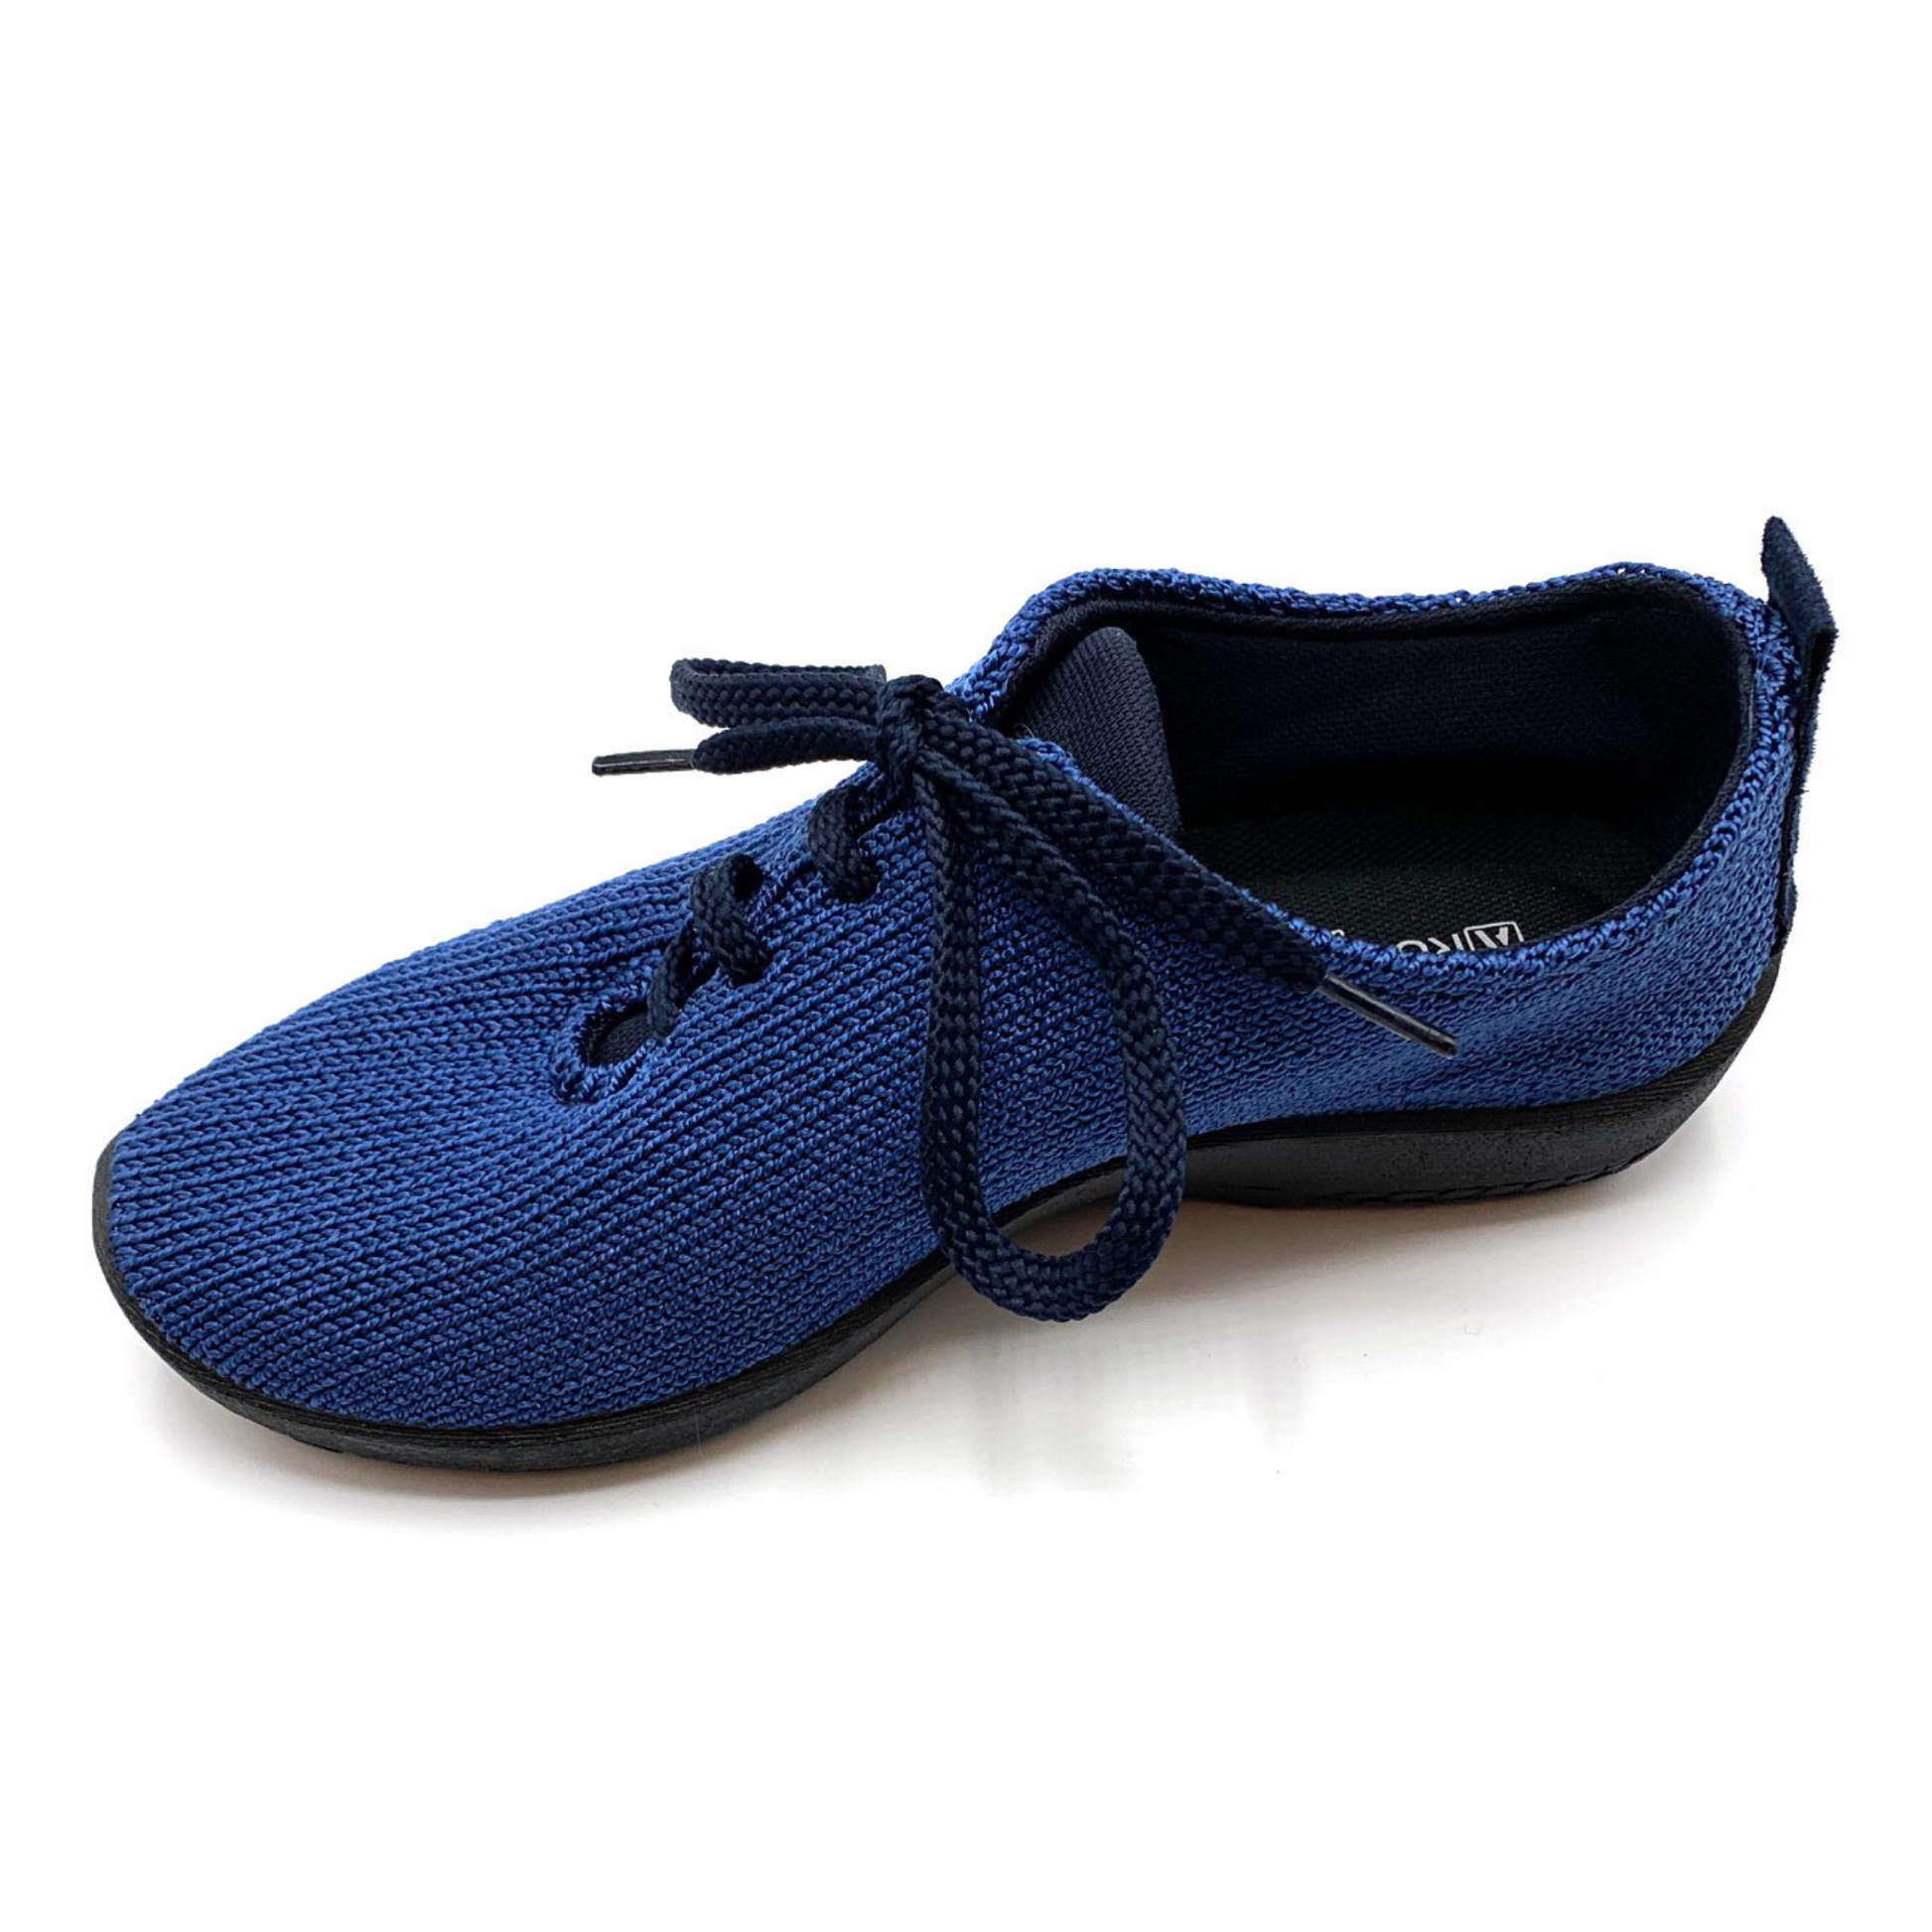 Angled view of knit blue sneaker with black sole/lining and shoe strings.